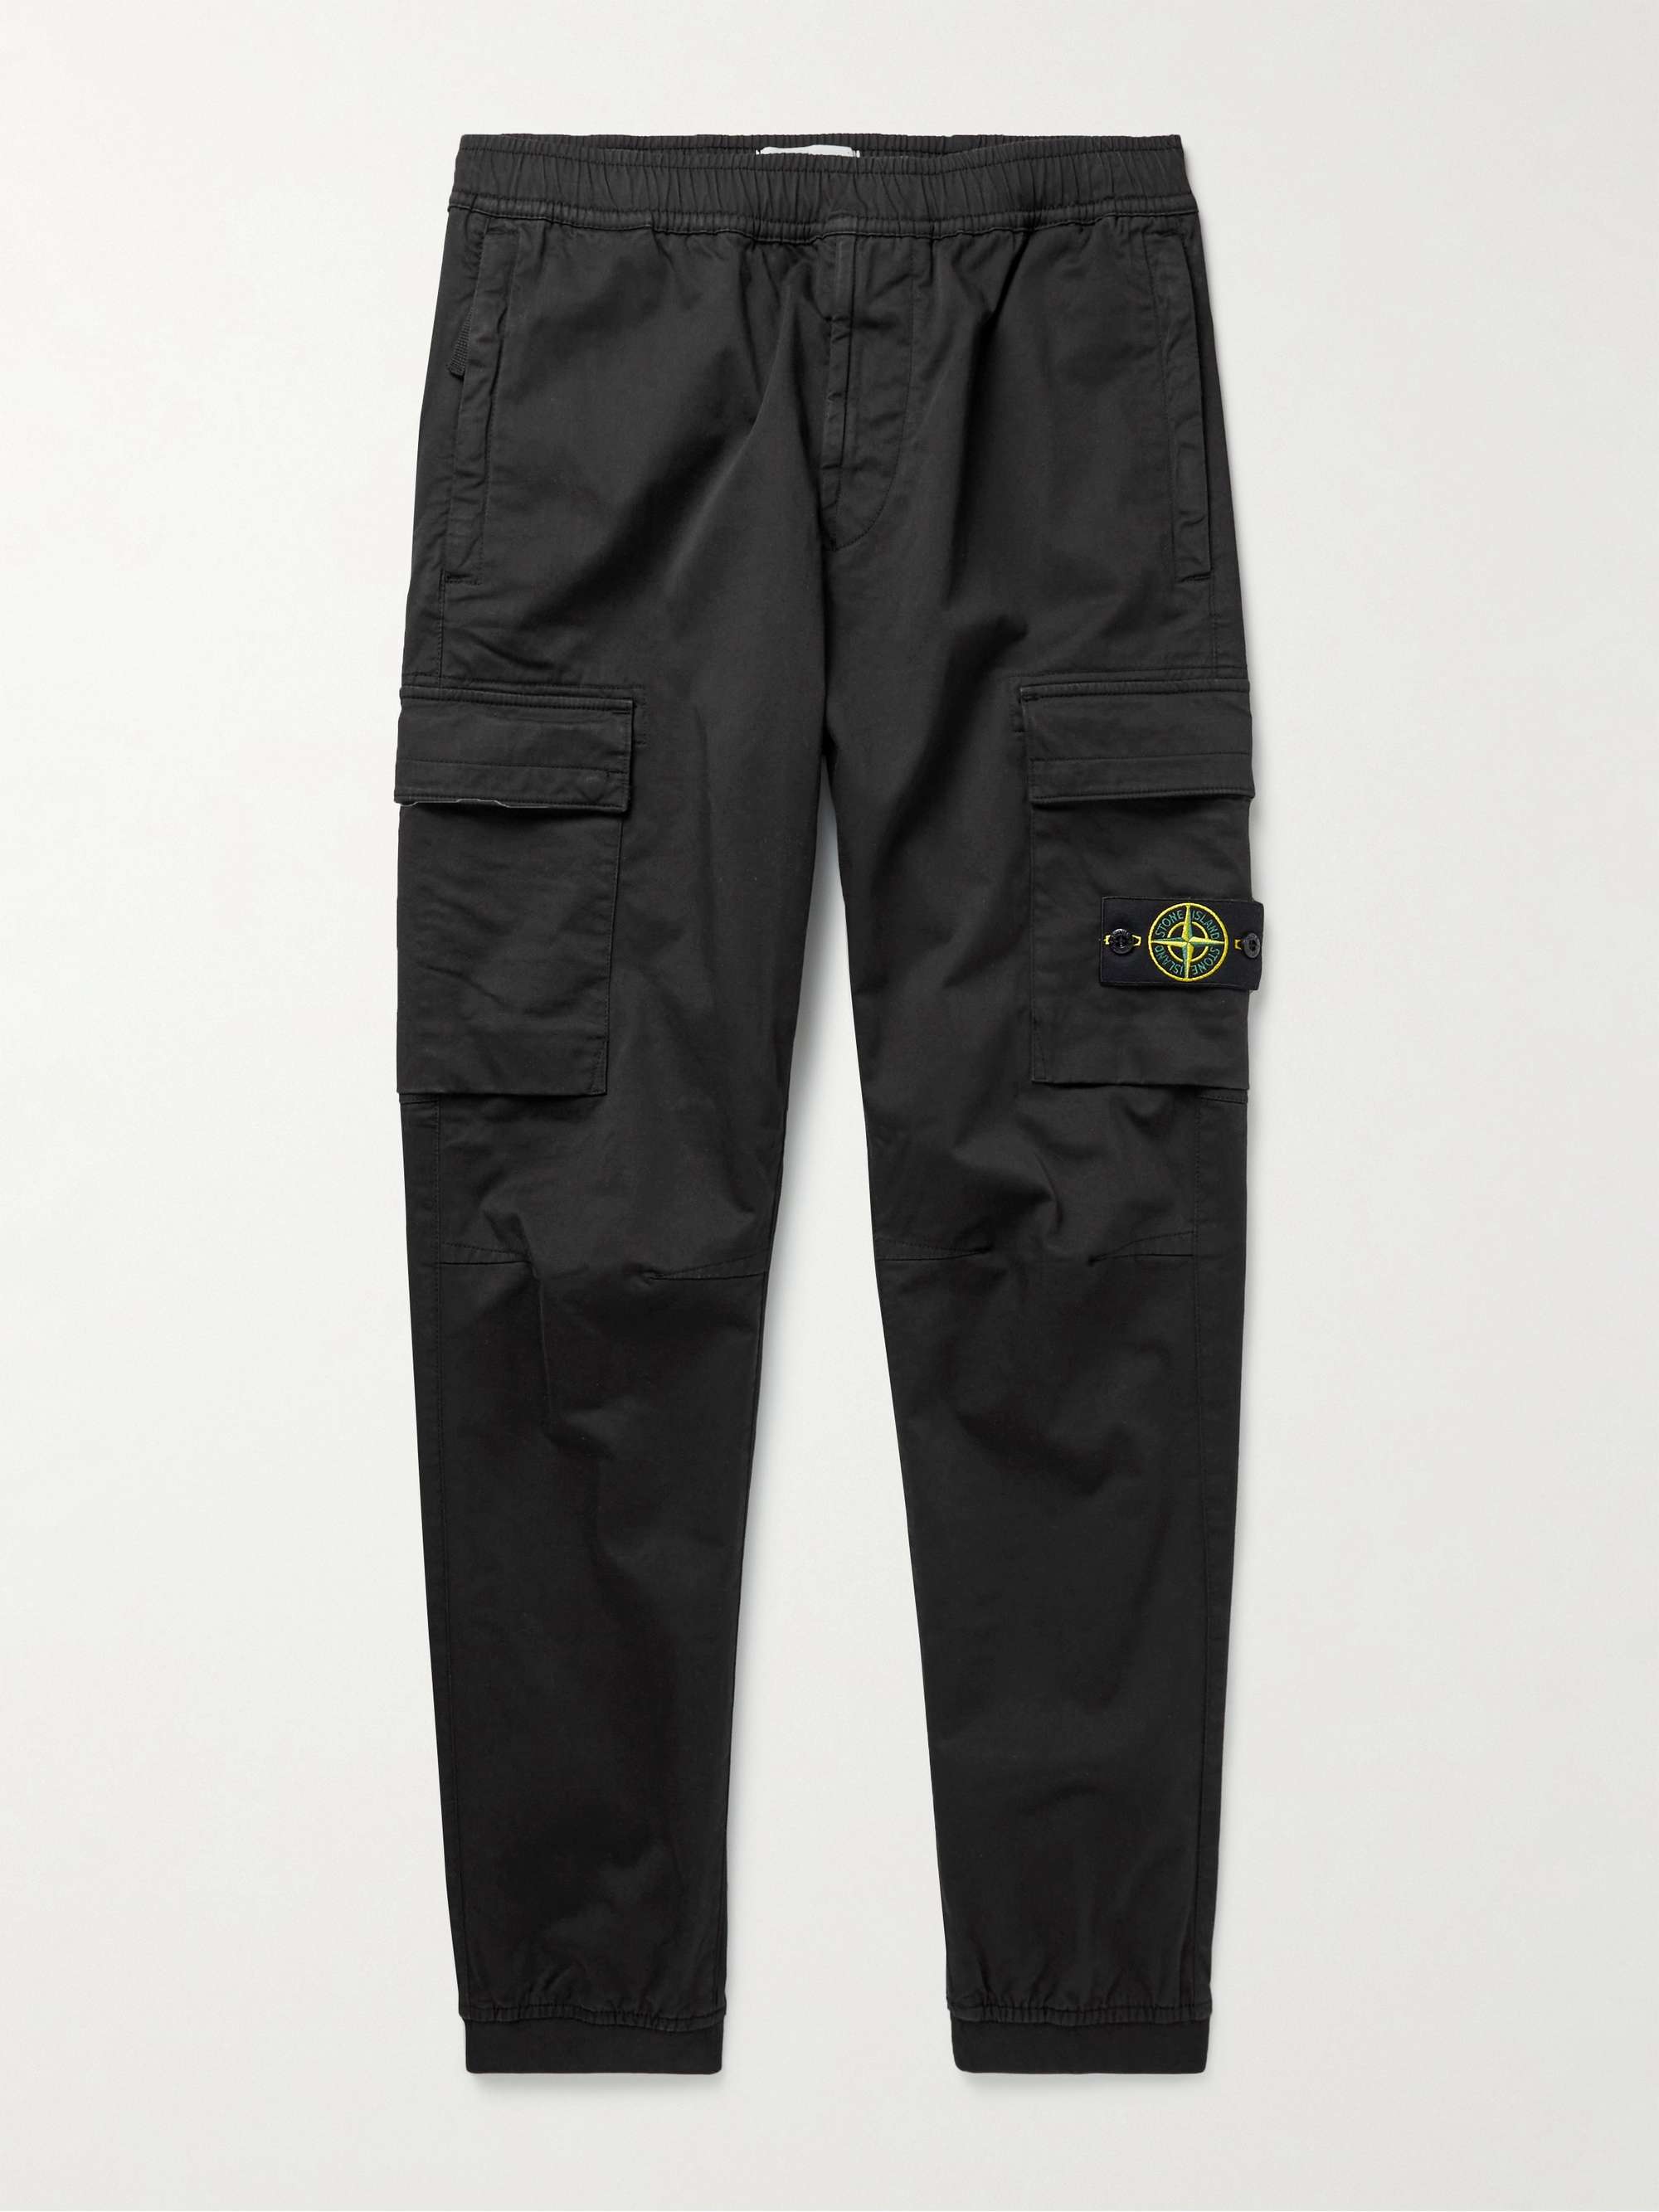 STONE ISLAND Tapered Logo-Appliquéd Garment-Dyed Cotton-Blend Cargo Trousers